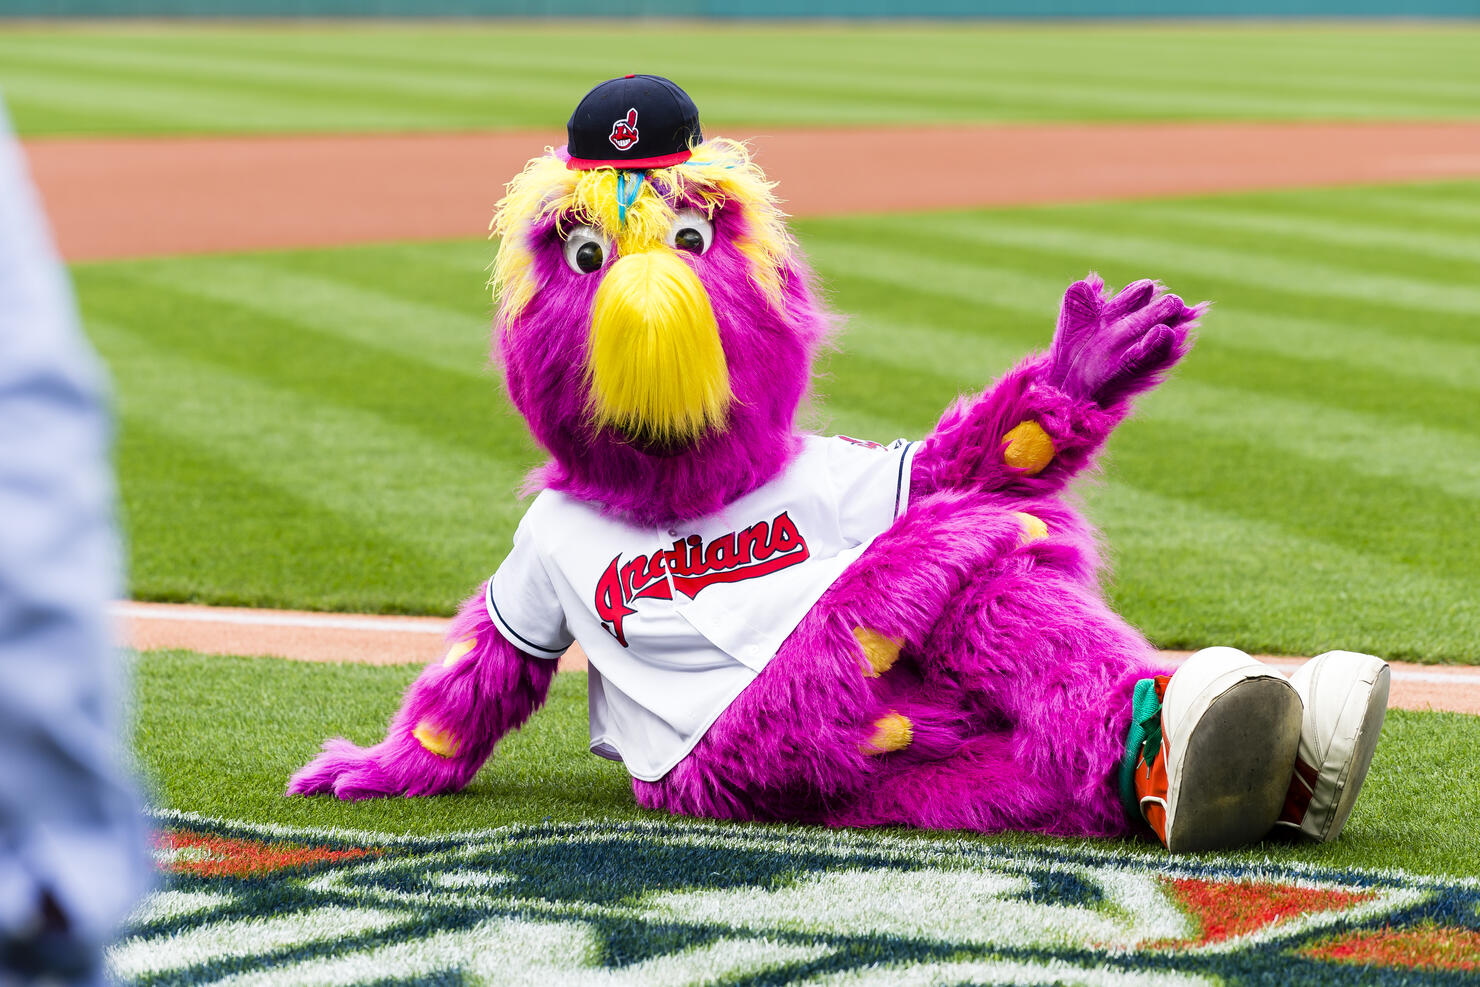 Cleveland Indians welcome new mascot to the team (photo)